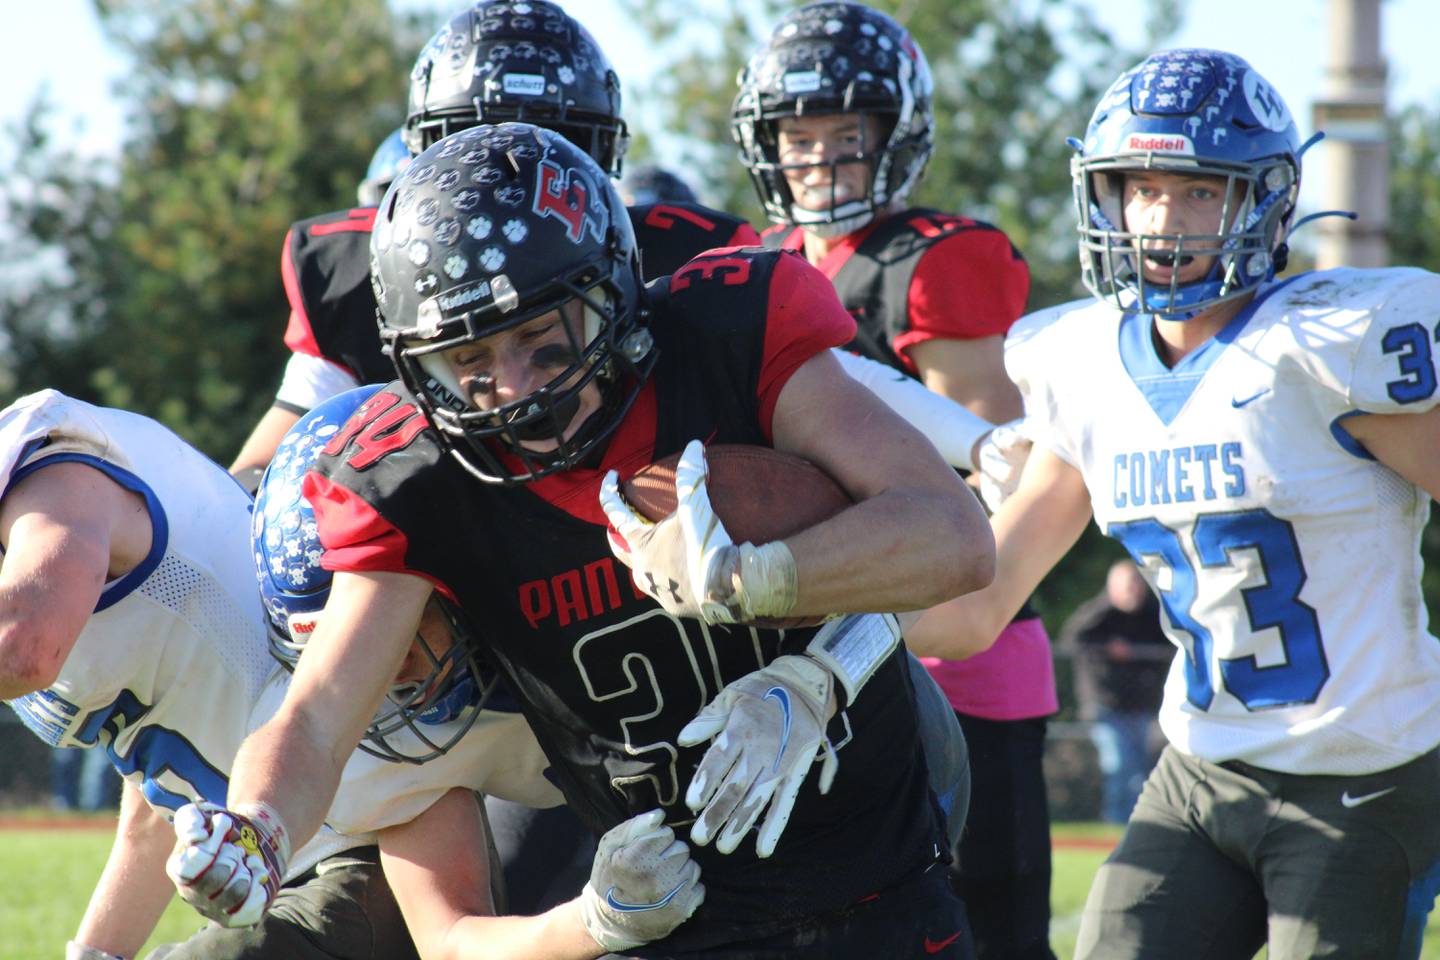 Erie-Prophetstown running back Connor Sibley (34) fights for extra yardage. He had 11 carries for 93 yards and scored on a 17-yard touchdown run on Saturday, Oct. 30, 2021, in a Class 2A playoff game at Erie High School.